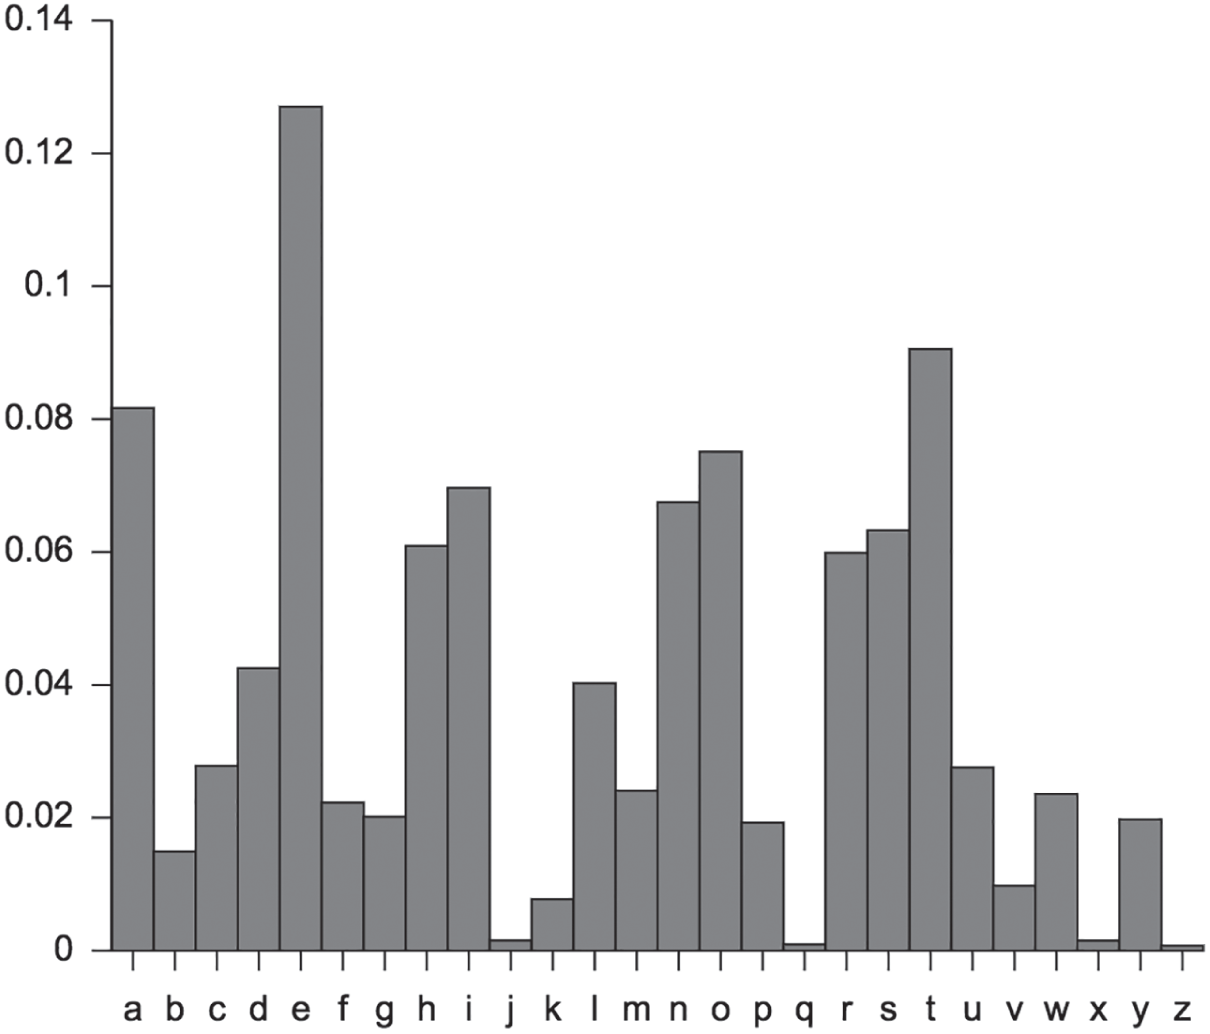 Histogram depicting how often the 26 different letters of the English alphabet are used in English text.